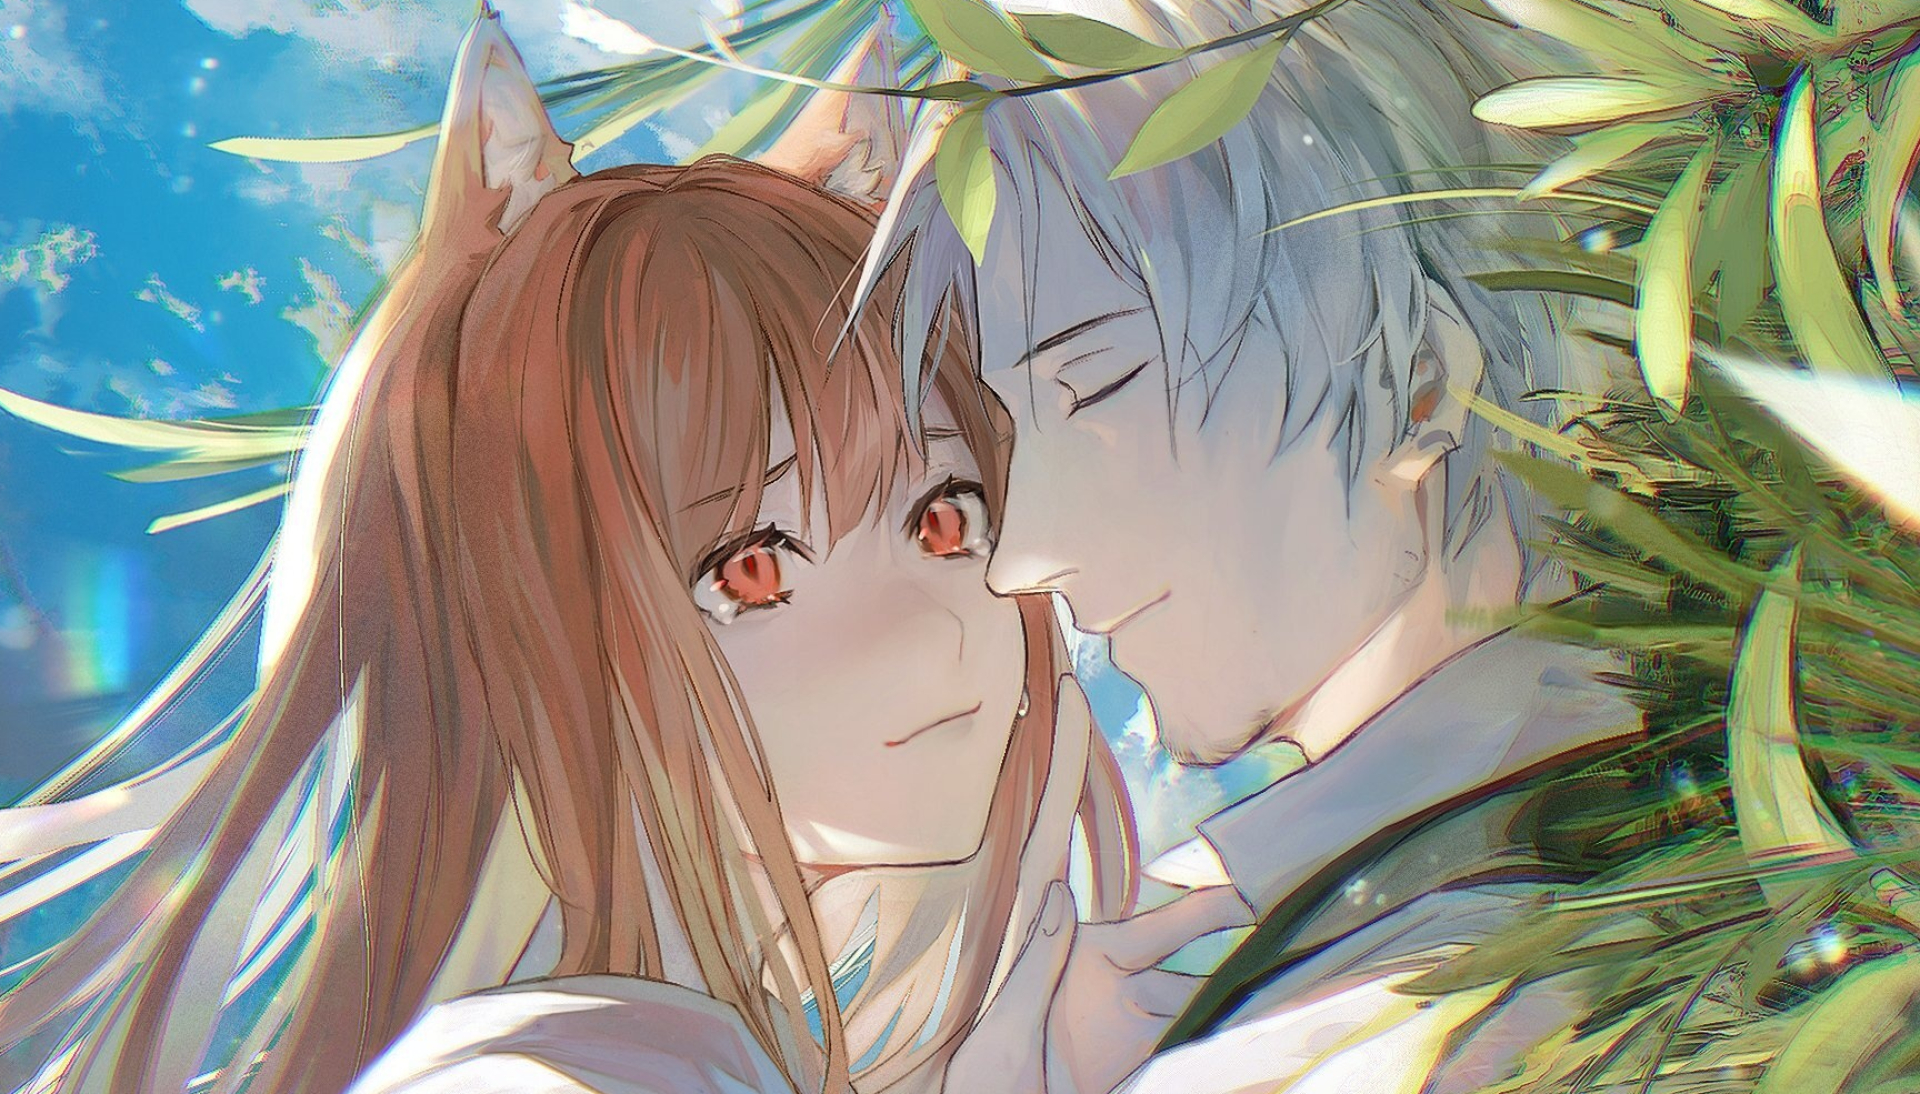 Spice and Wolf (Anime): Loving couple, Romantic relationship, Twenty-five-year-old traveling peddler. 1920x1100 HD Wallpaper.